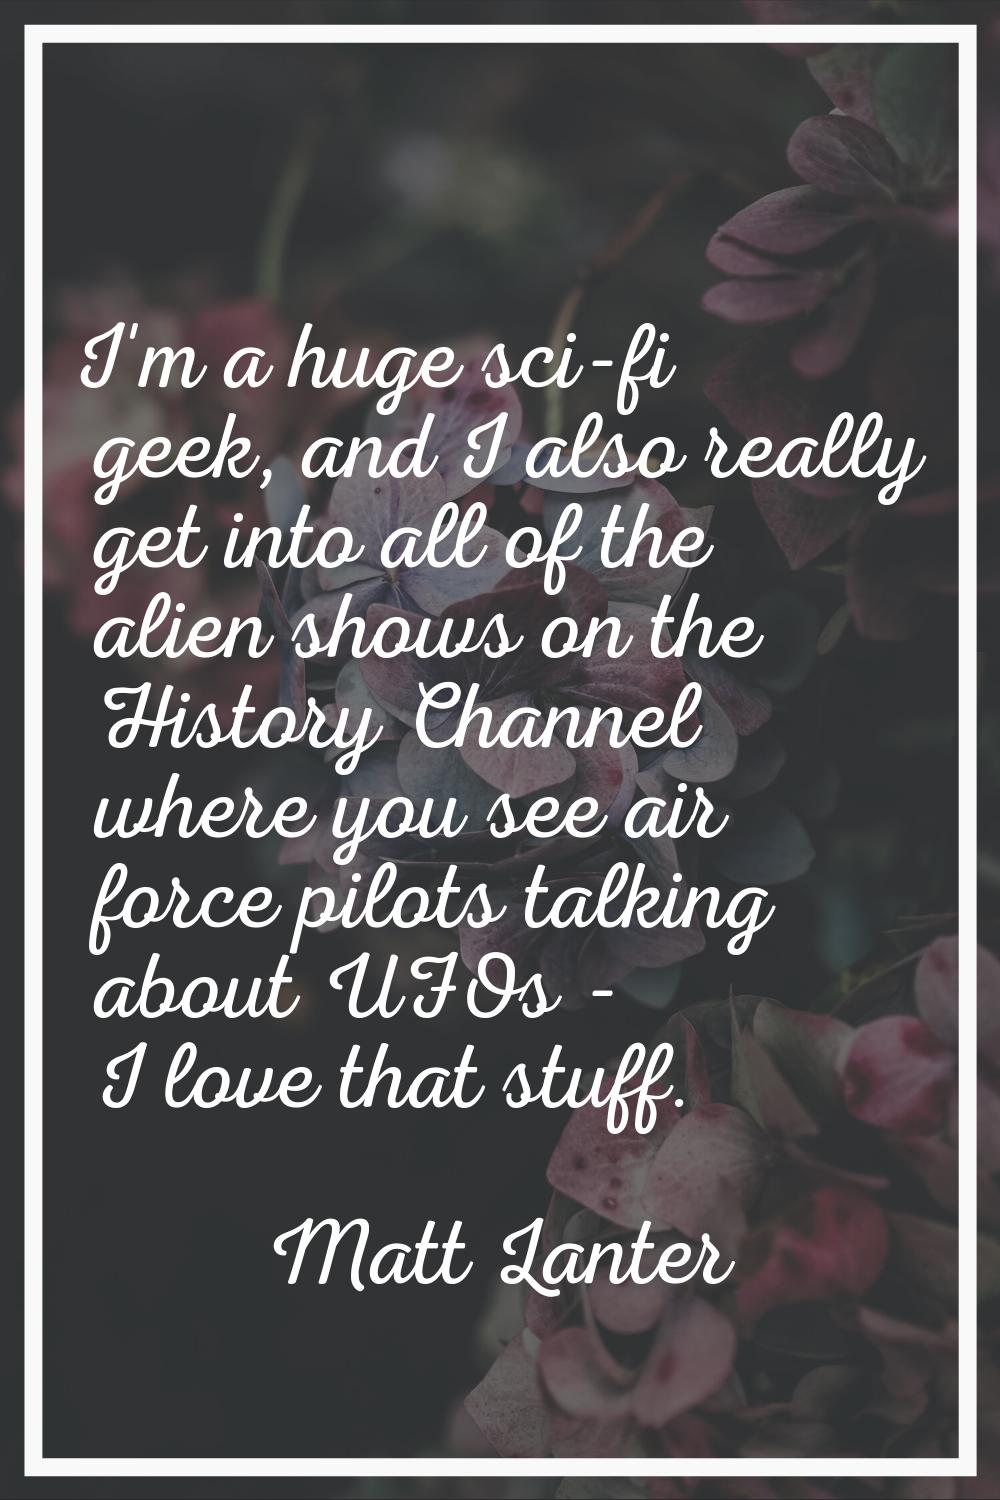 I'm a huge sci-fi geek, and I also really get into all of the alien shows on the History Channel wh